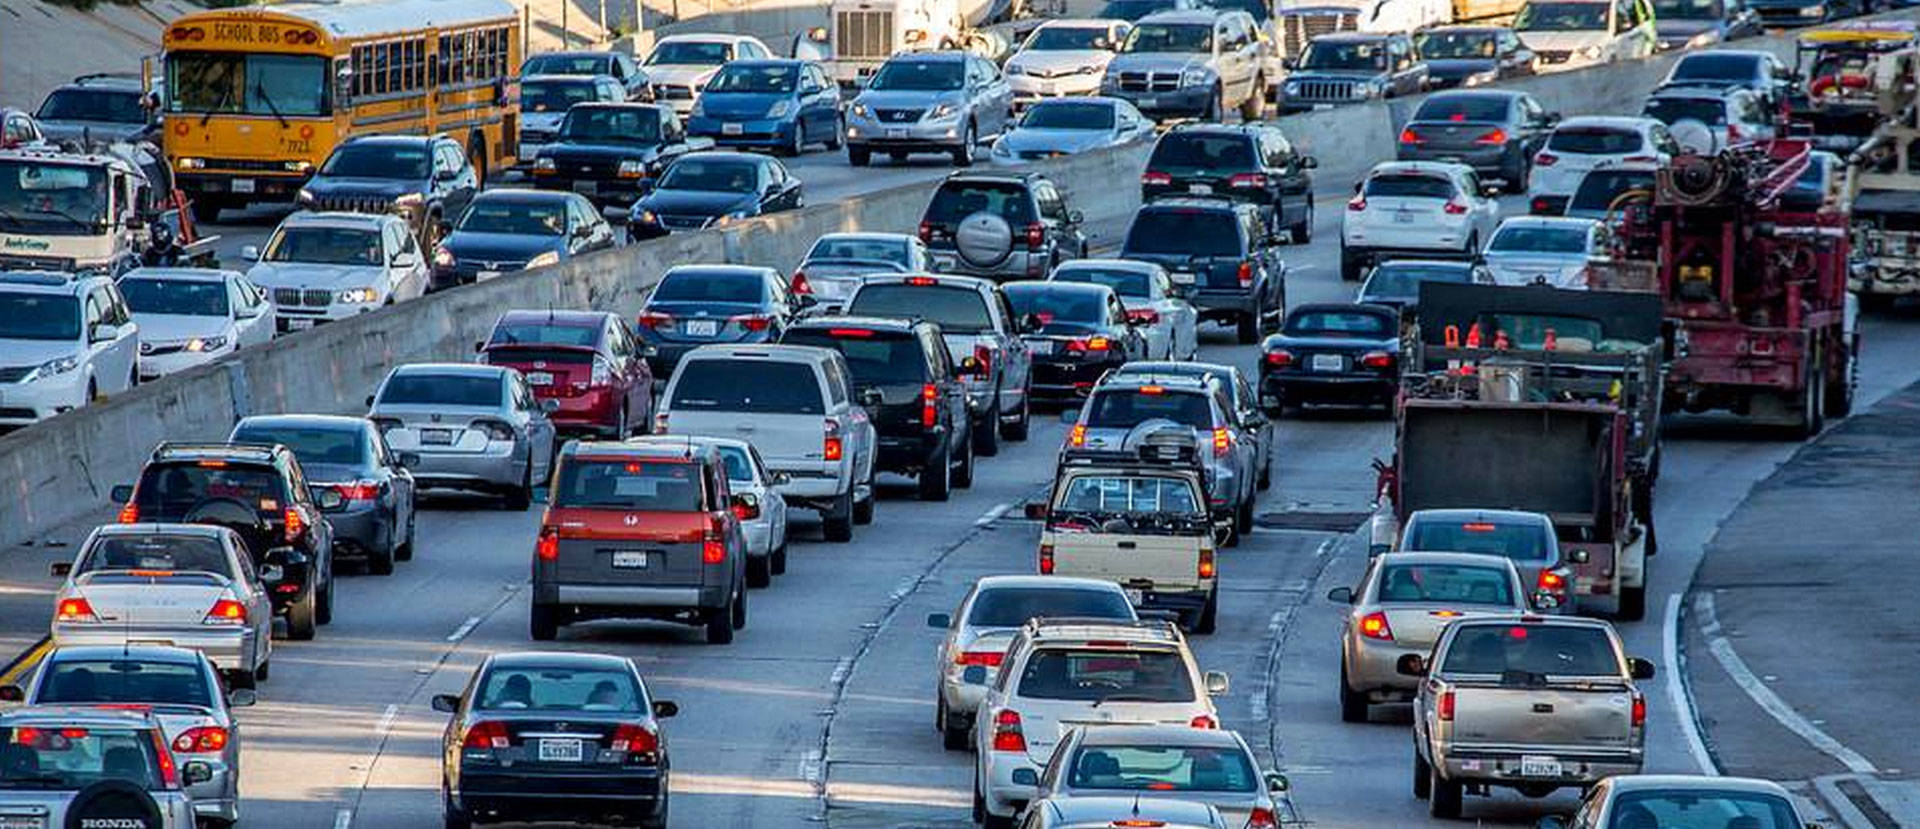 The traffic clogging California's roadways spews streams of greenhouse gases into the air. Eric Demarcq/Creative Commons